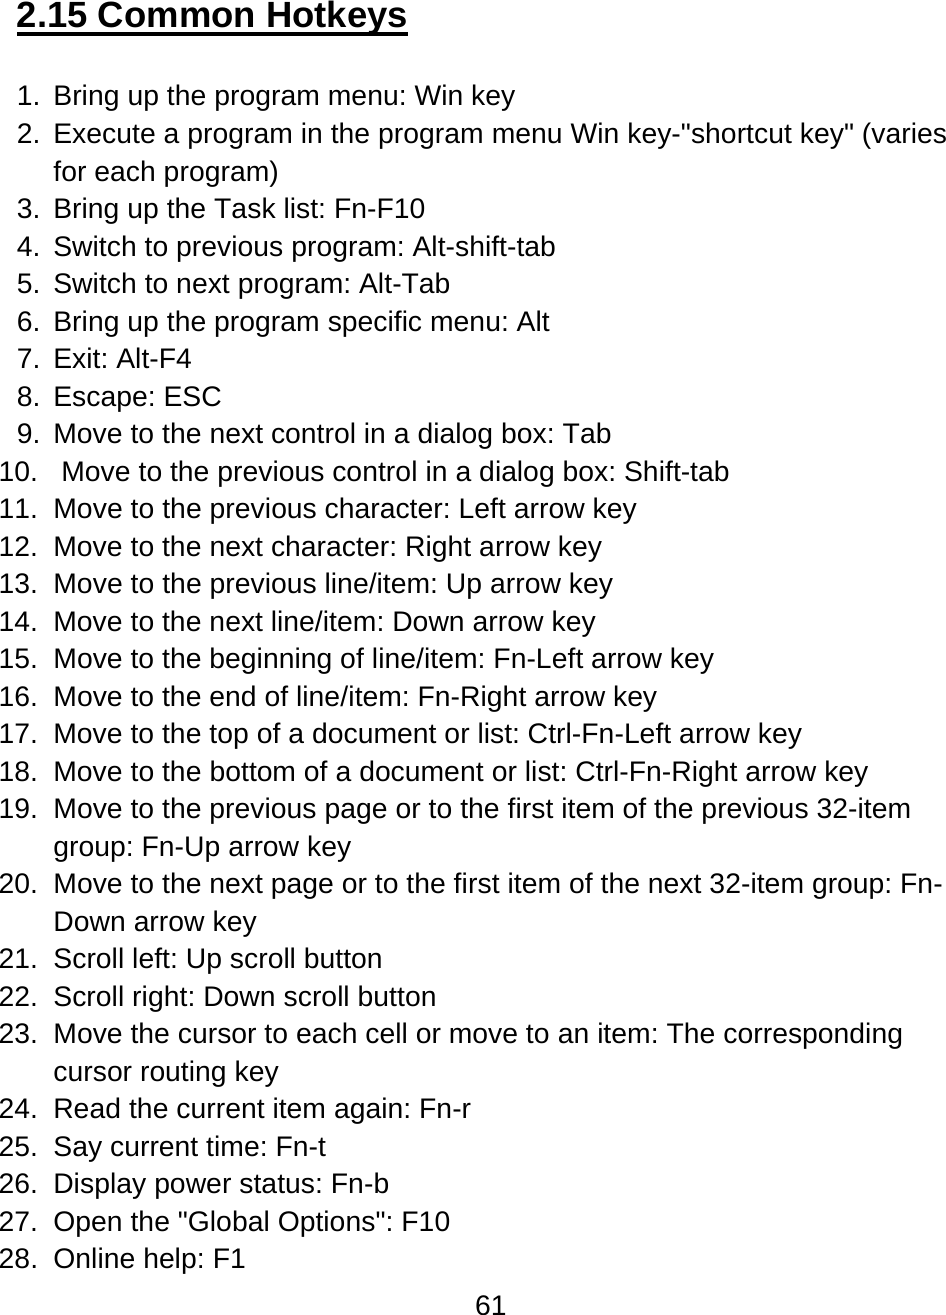 61  2.15 Common Hotkeys  1.  Bring up the program menu: Win key 2.  Execute a program in the program menu Win key-&quot;shortcut key&quot; (varies for each program) 3.  Bring up the Task list: Fn-F10 4. Switch to previous program: Alt-shift-tab 5. Switch to next program: Alt-Tab 6.  Bring up the program specific menu: Alt 7. Exit: Alt-F4 8. Escape: ESC 9.  Move to the next control in a dialog box: Tab  10.   Move to the previous control in a dialog box: Shift-tab  11.  Move to the previous character: Left arrow key 12.  Move to the next character: Right arrow key 13.  Move to the previous line/item: Up arrow key 14.  Move to the next line/item: Down arrow key 15.  Move to the beginning of line/item: Fn-Left arrow key 16.  Move to the end of line/item: Fn-Right arrow key 17.  Move to the top of a document or list: Ctrl-Fn-Left arrow key 18.  Move to the bottom of a document or list: Ctrl-Fn-Right arrow key 19.  Move to the previous page or to the first item of the previous 32-item group: Fn-Up arrow key  20.  Move to the next page or to the first item of the next 32-item group: Fn-Down arrow key 21.  Scroll left: Up scroll button 22.  Scroll right: Down scroll button 23.  Move the cursor to each cell or move to an item: The corresponding cursor routing key 24.  Read the current item again: Fn-r 25.  Say current time: Fn-t 26.  Display power status: Fn-b 27.  Open the &quot;Global Options&quot;: F10 28.  Online help: F1 